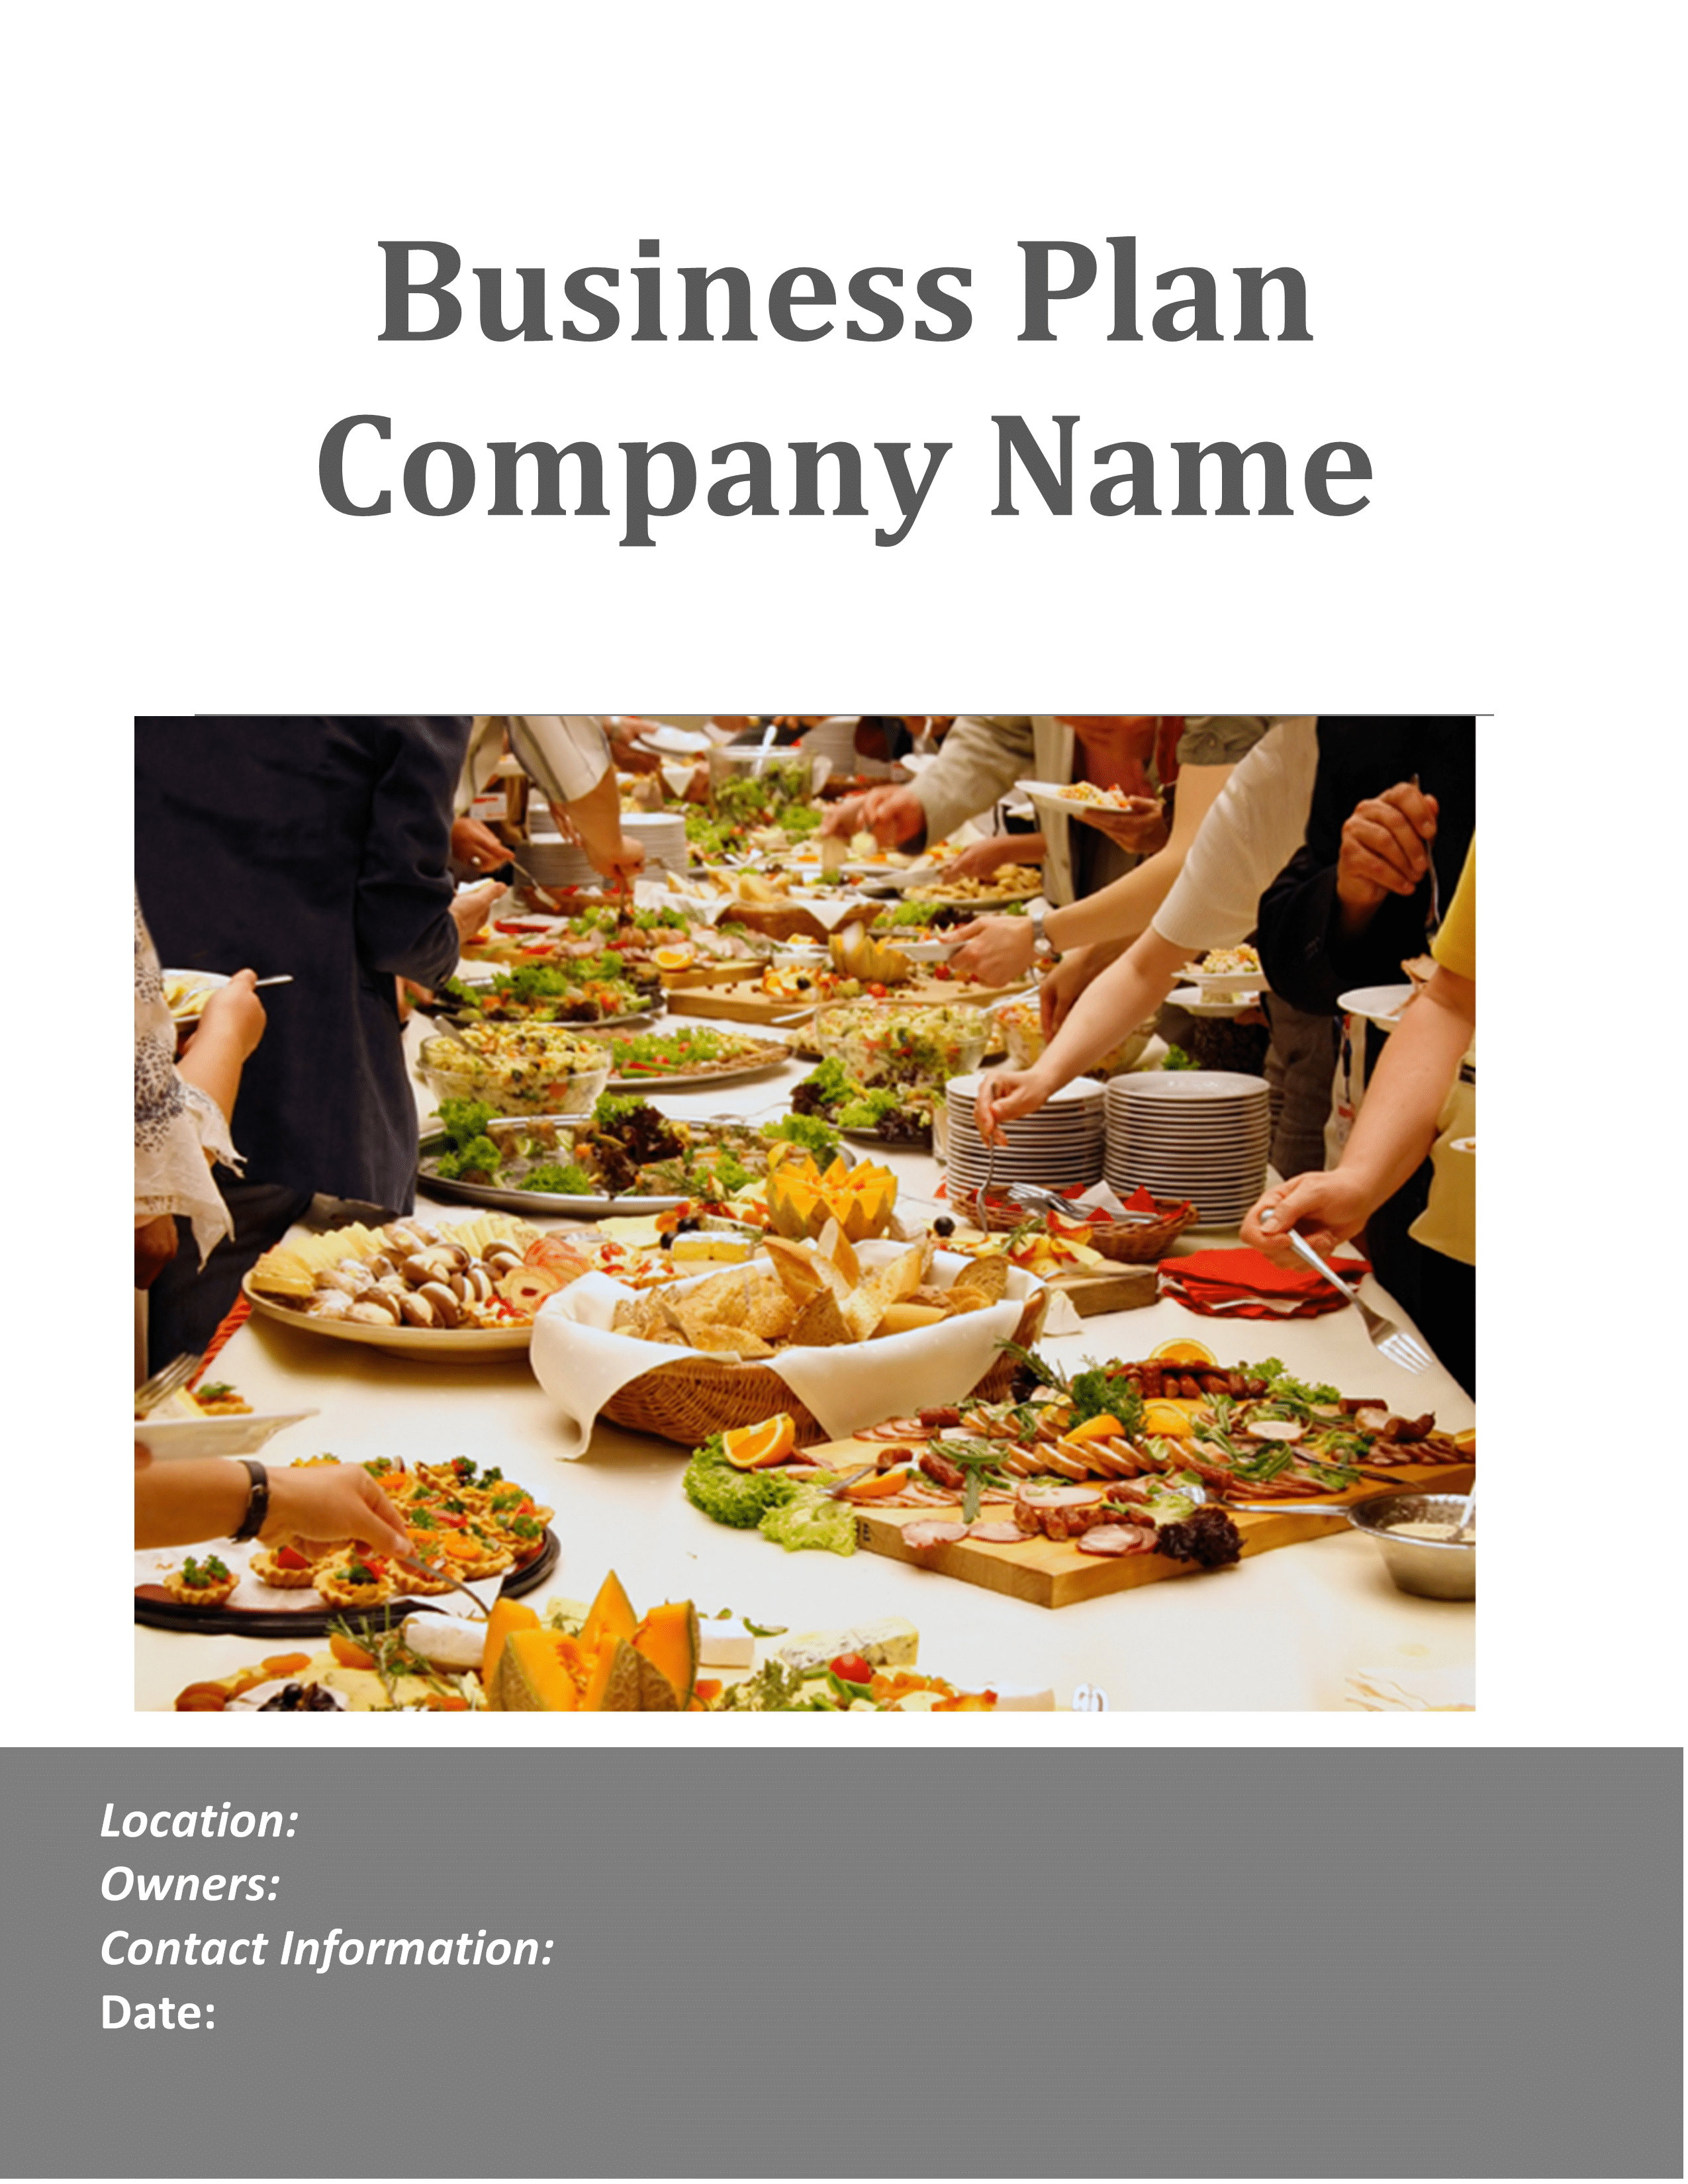 business plan for selling food stuff